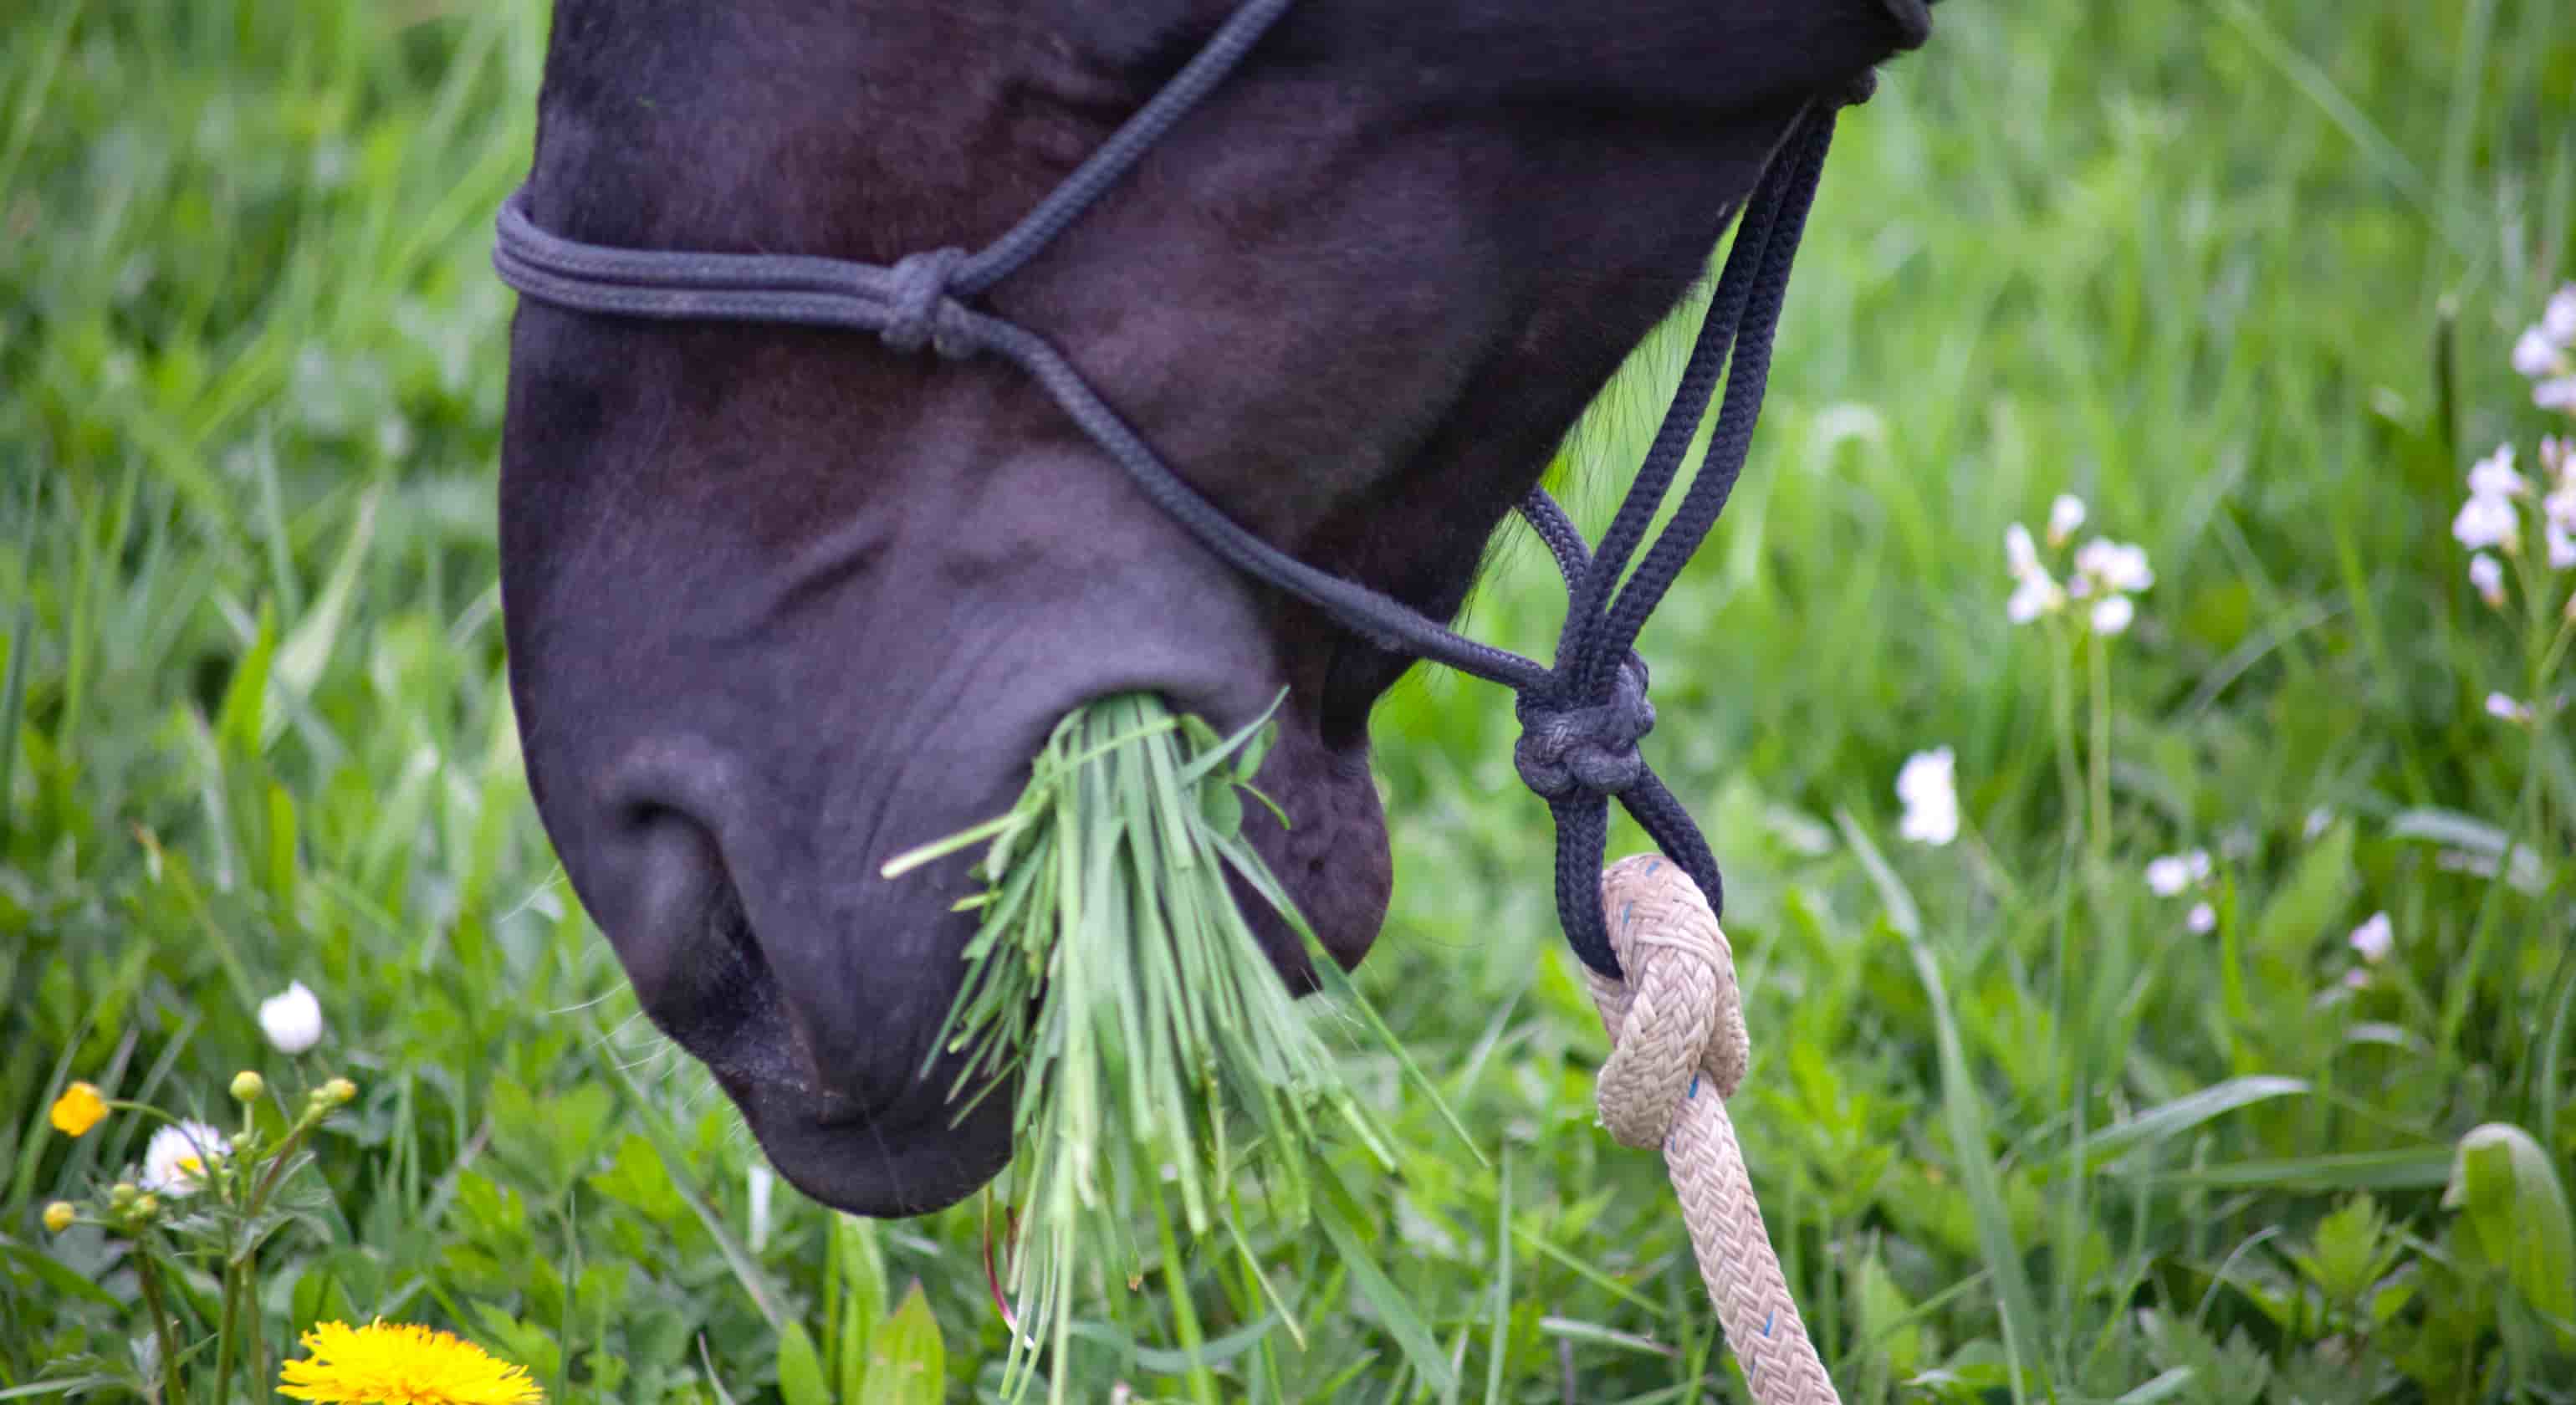 Simple Feeding – Supplementing Based Equine Diets